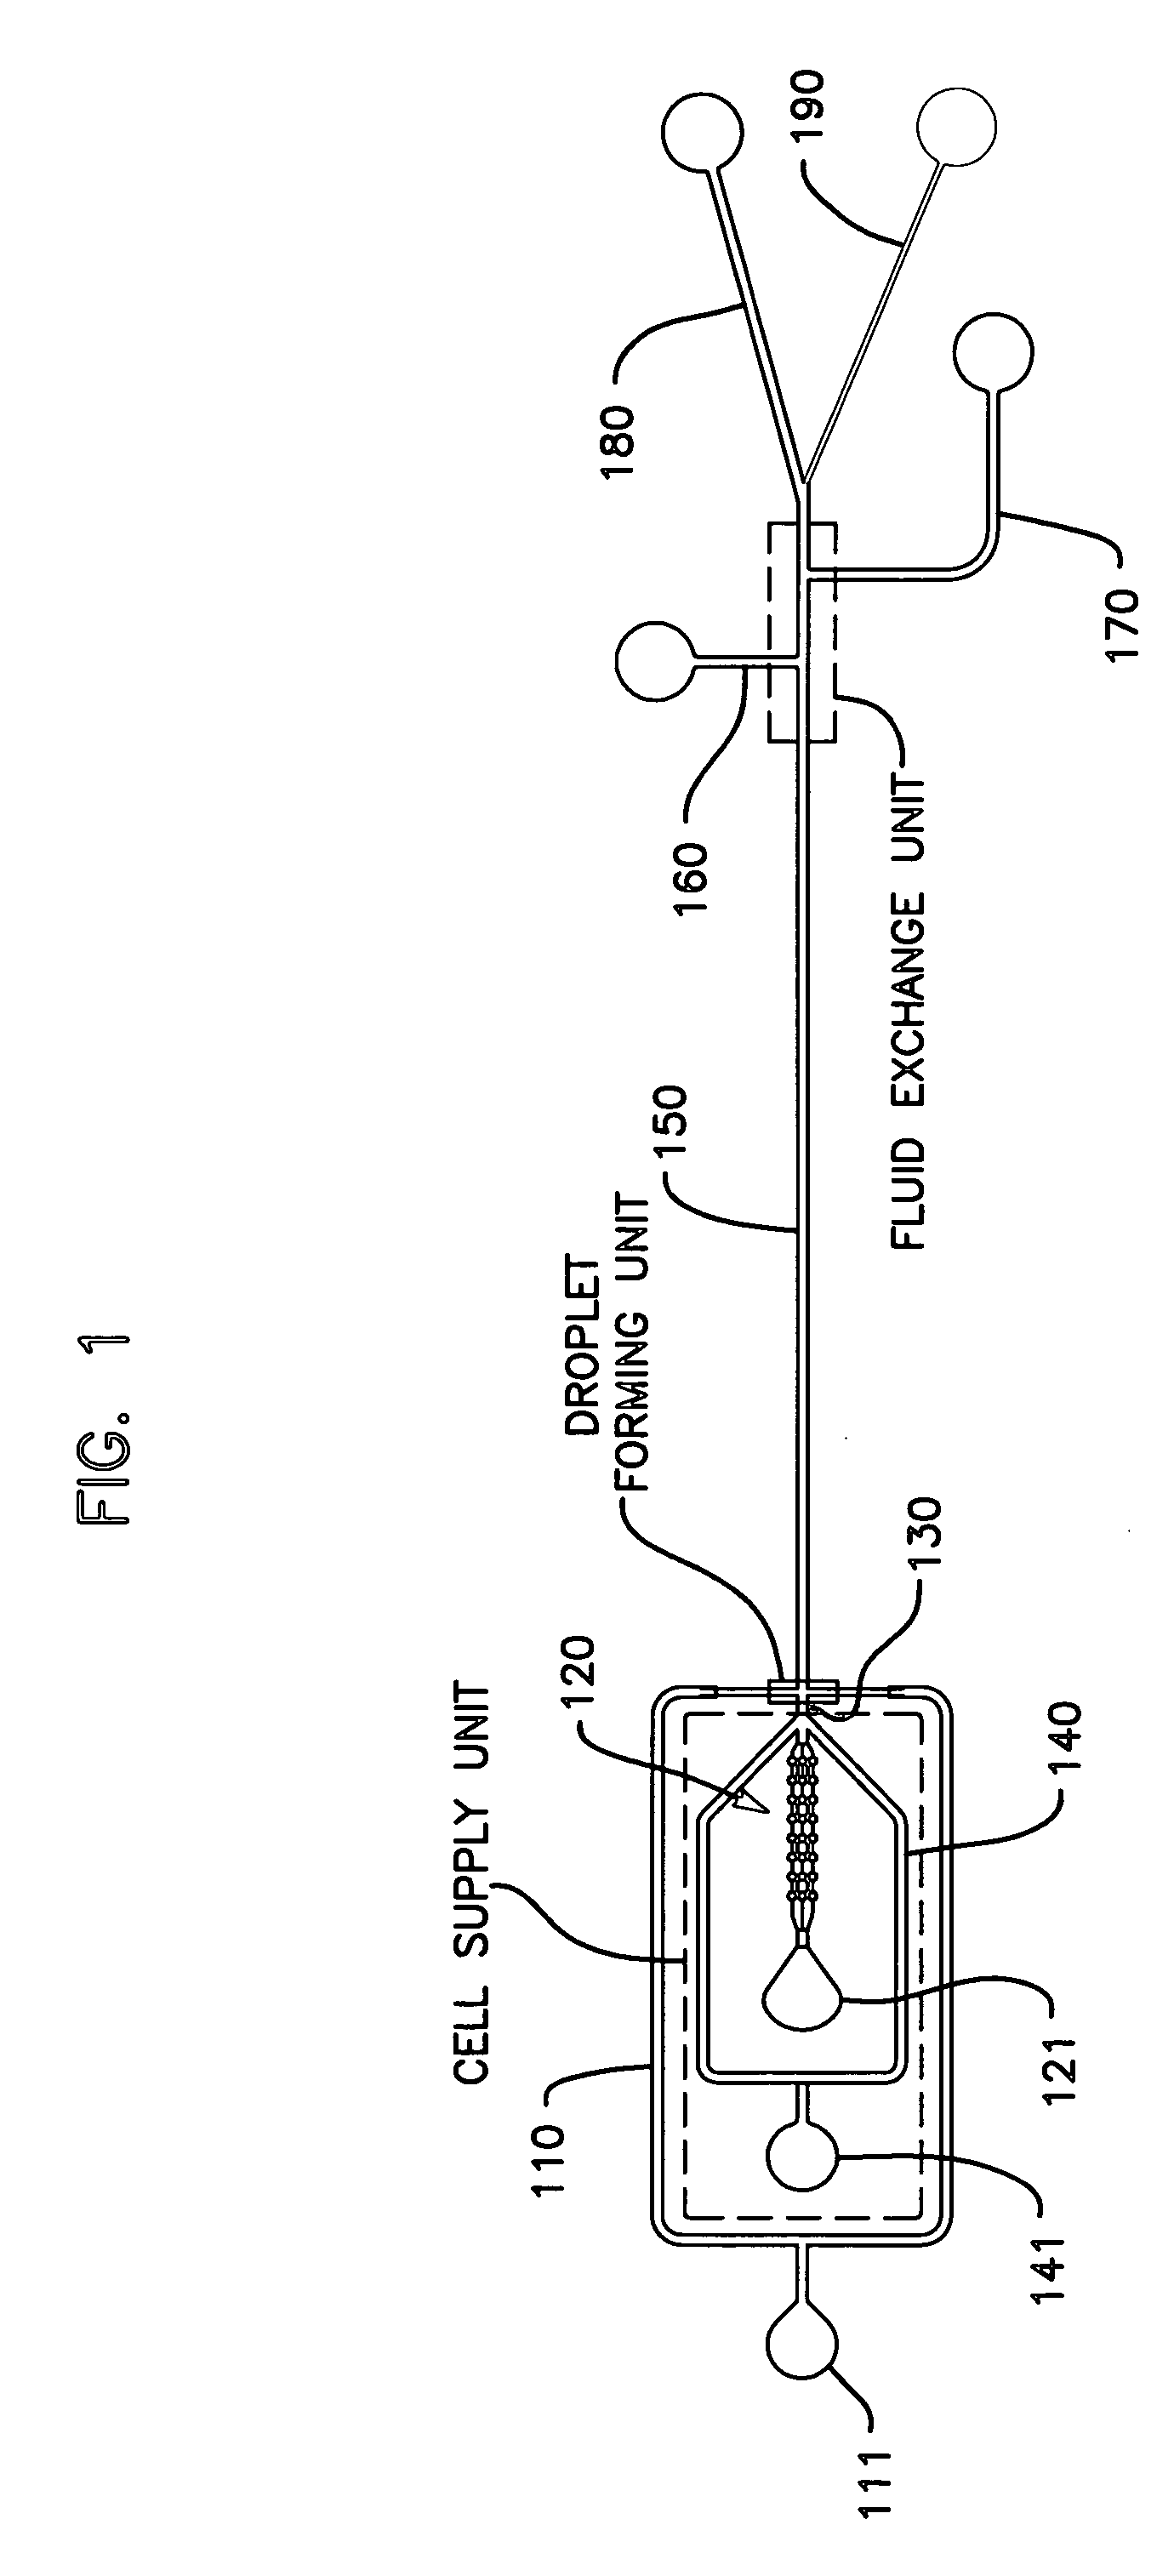 Apparatus and method for fabricating Micro-Capsule